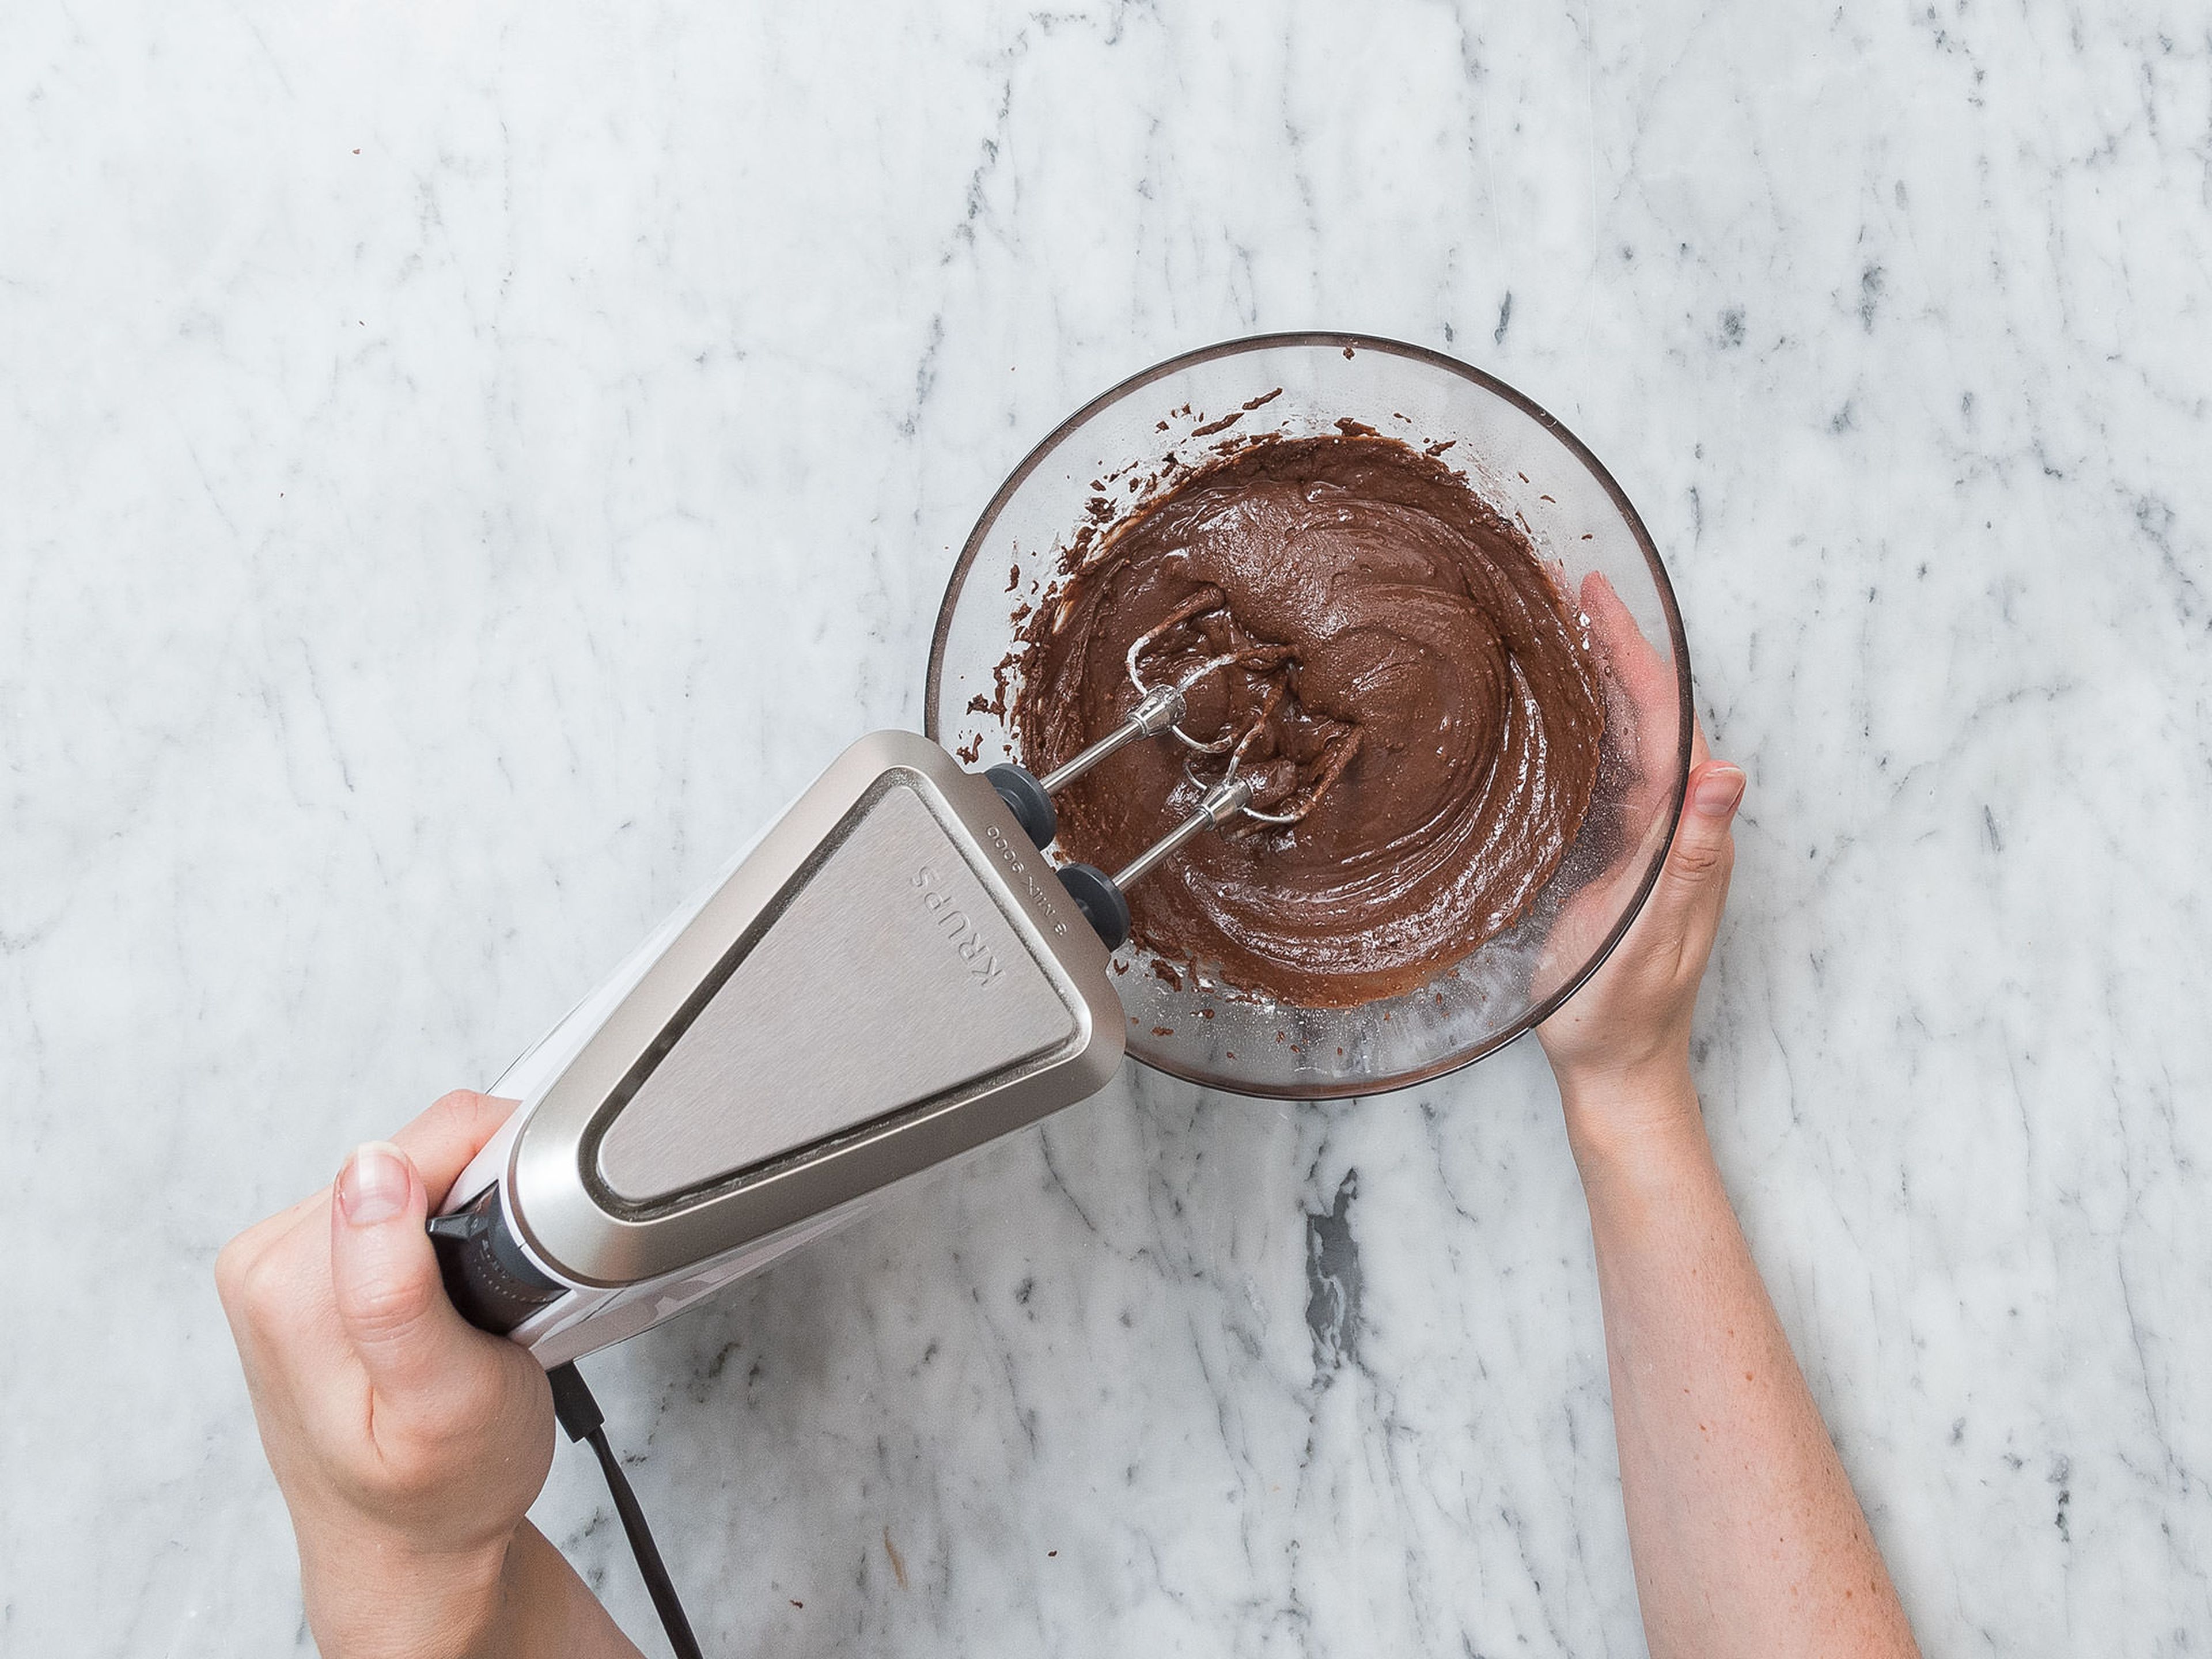 Transfer chocolate to a heatproof bowl set over a saucepan filled with simmering water, Melt chocolate, stirring occasionally. Allow to cool down for approx. 5 min. Add blended hazelnuts, melted chocolate, neutral oil, confectioner’s sugar, cocoa powder, and vanilla extract to a mixing bowl. Using a stand mixer or hand mixer with beaters, stir until combined. Transfer chocolate-hazelnut spread into a mason jar. Enjoy!